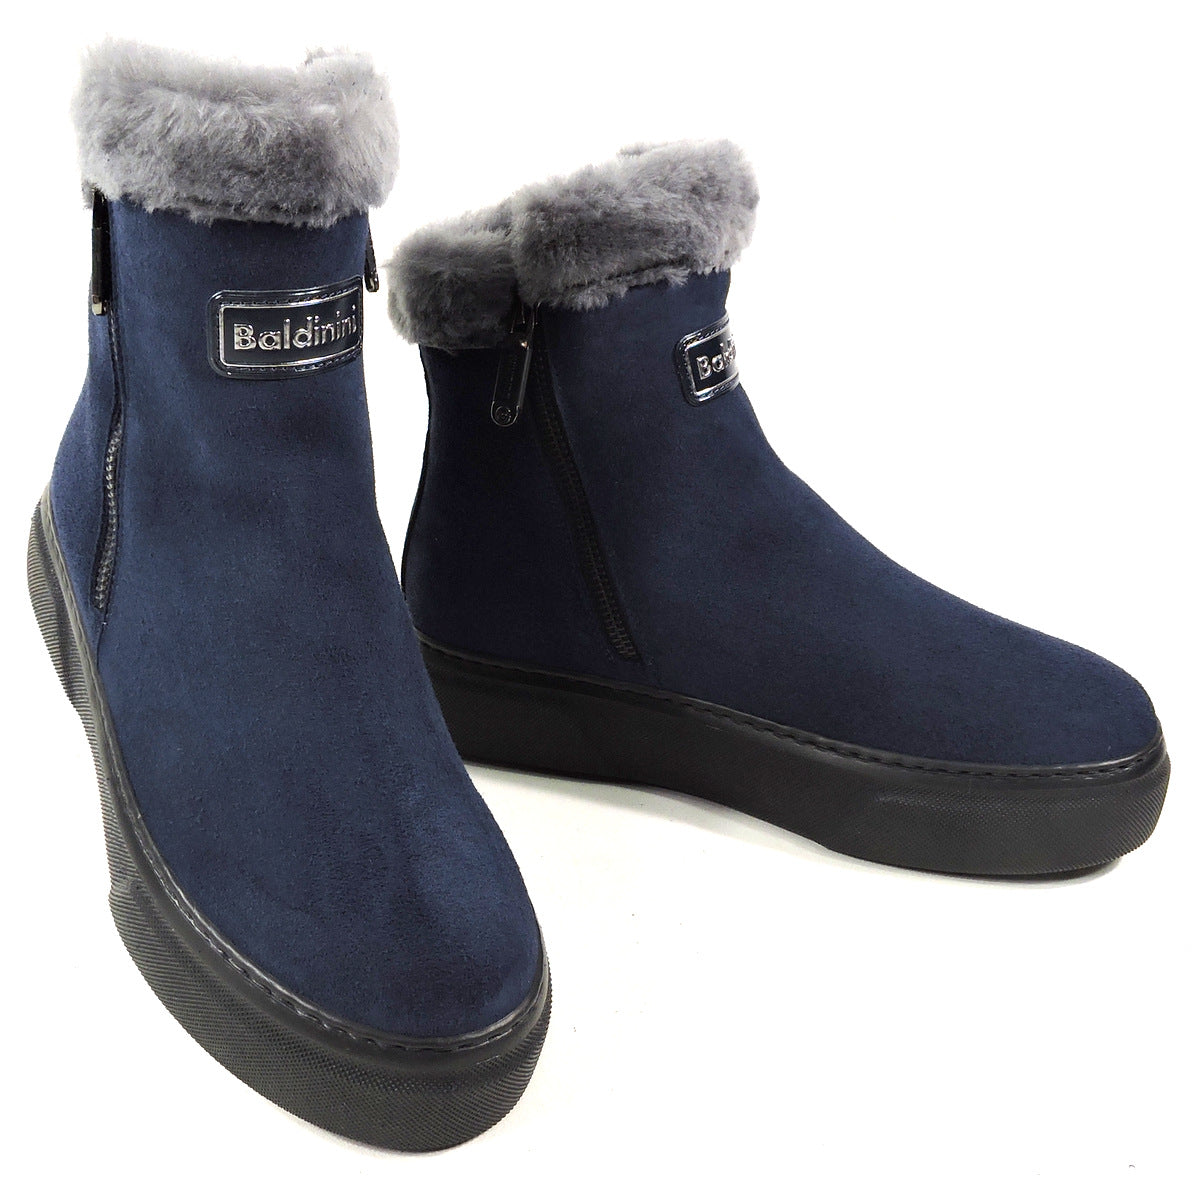 BALDININI 🇮🇹 WOMEN'S BLUE SUEDE WINTER BOOTS WITH REAL FUR INSIDE